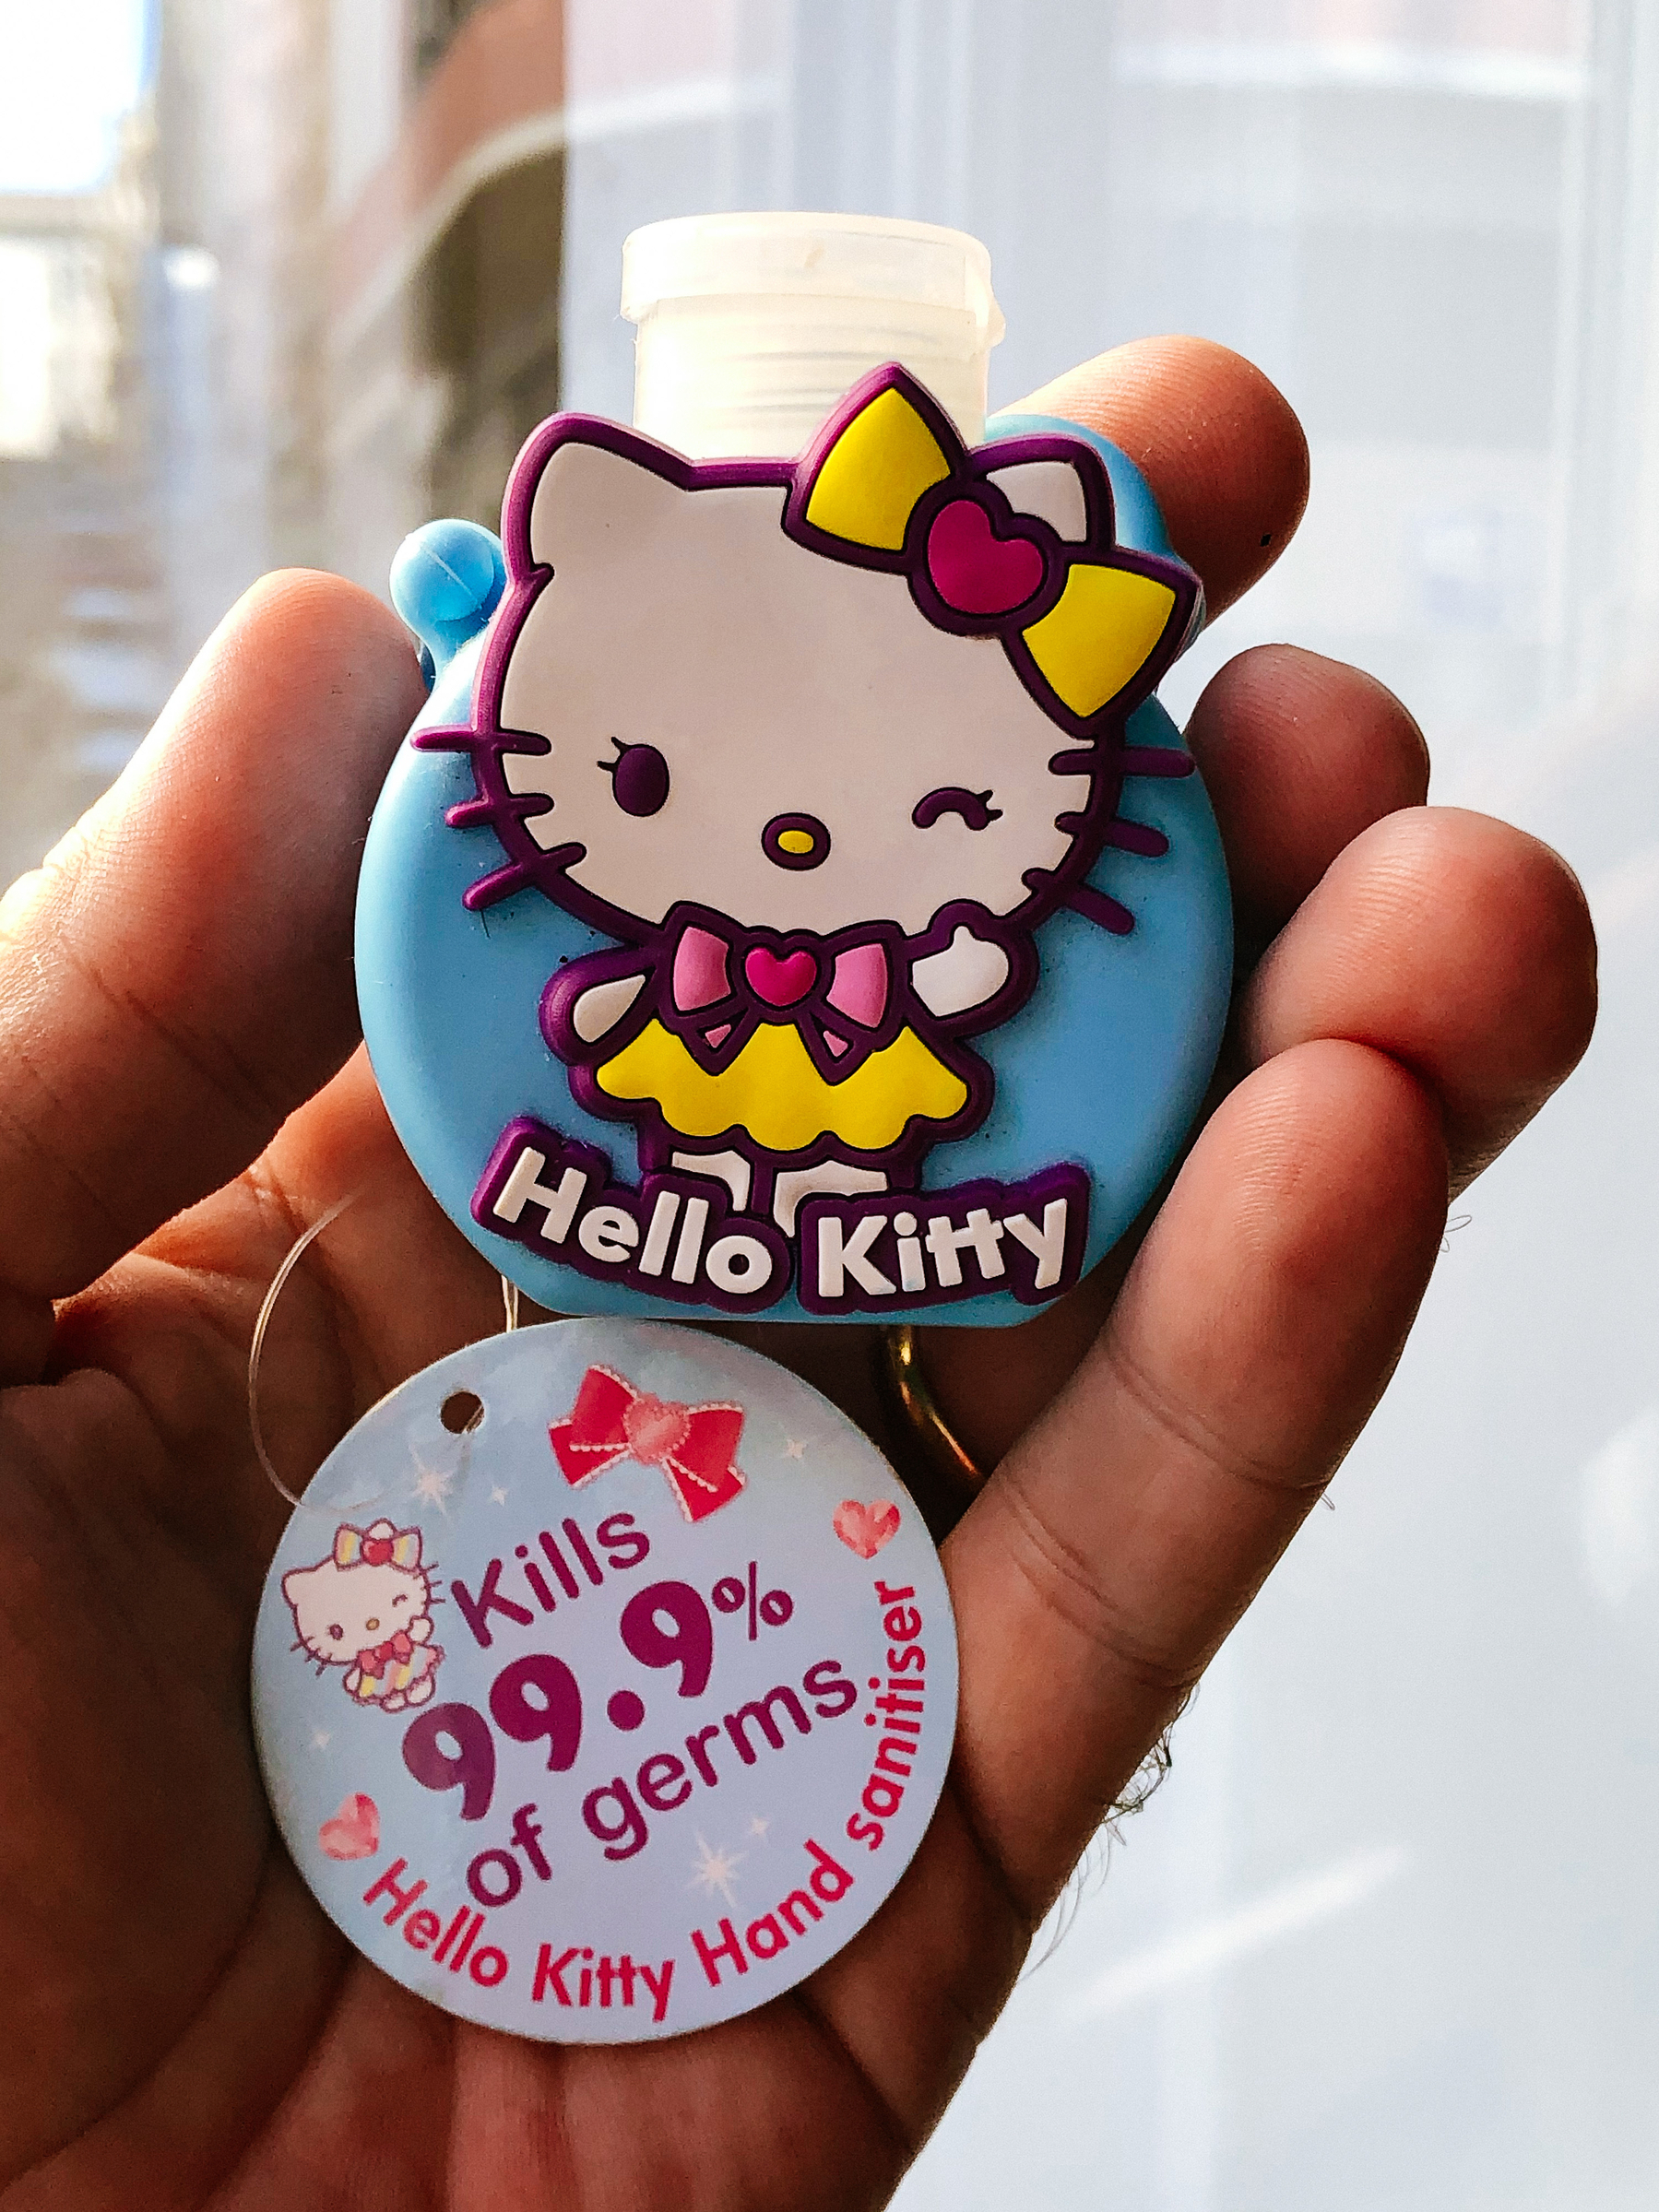 A bottle of Hello Kitty hand sanitizer. 